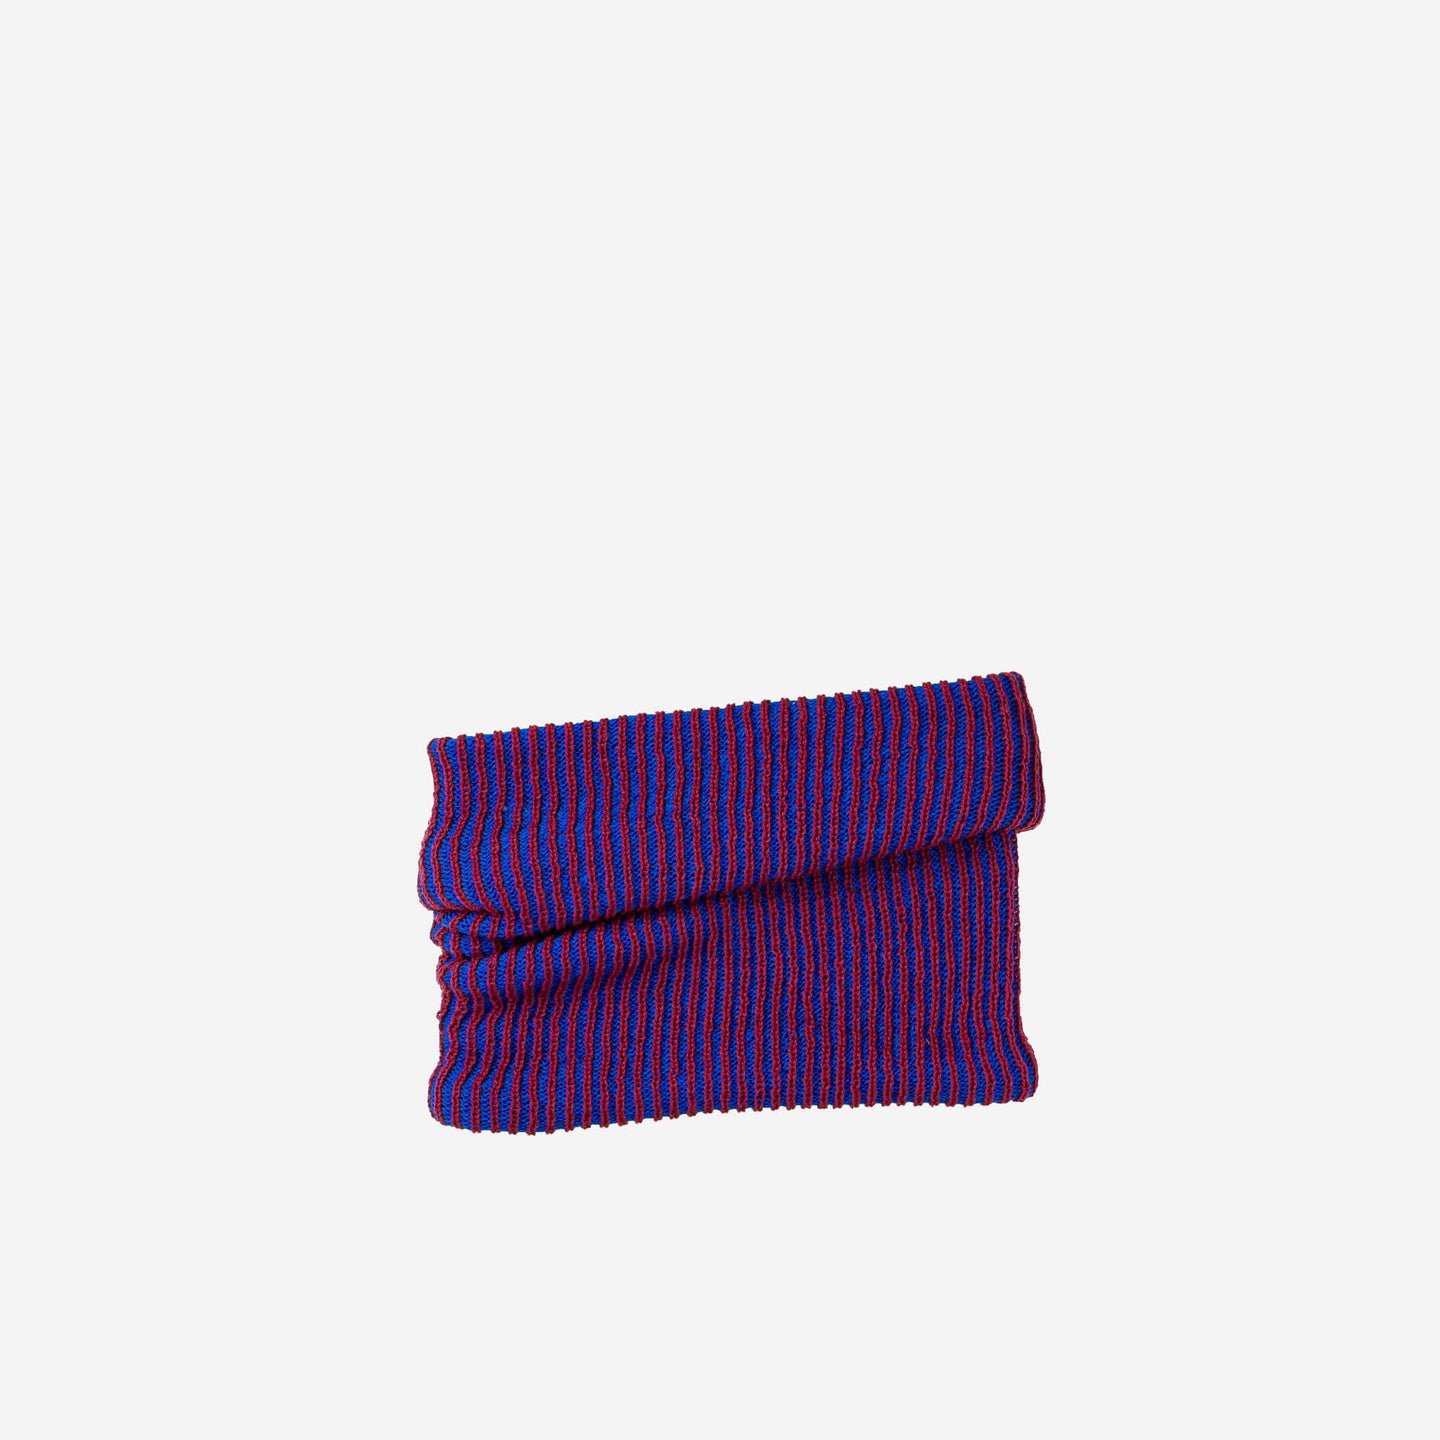 Two Tone Colorful Simple Rib Knit Snood Gaiter Neckwarmer Stretchy Holiday Gift